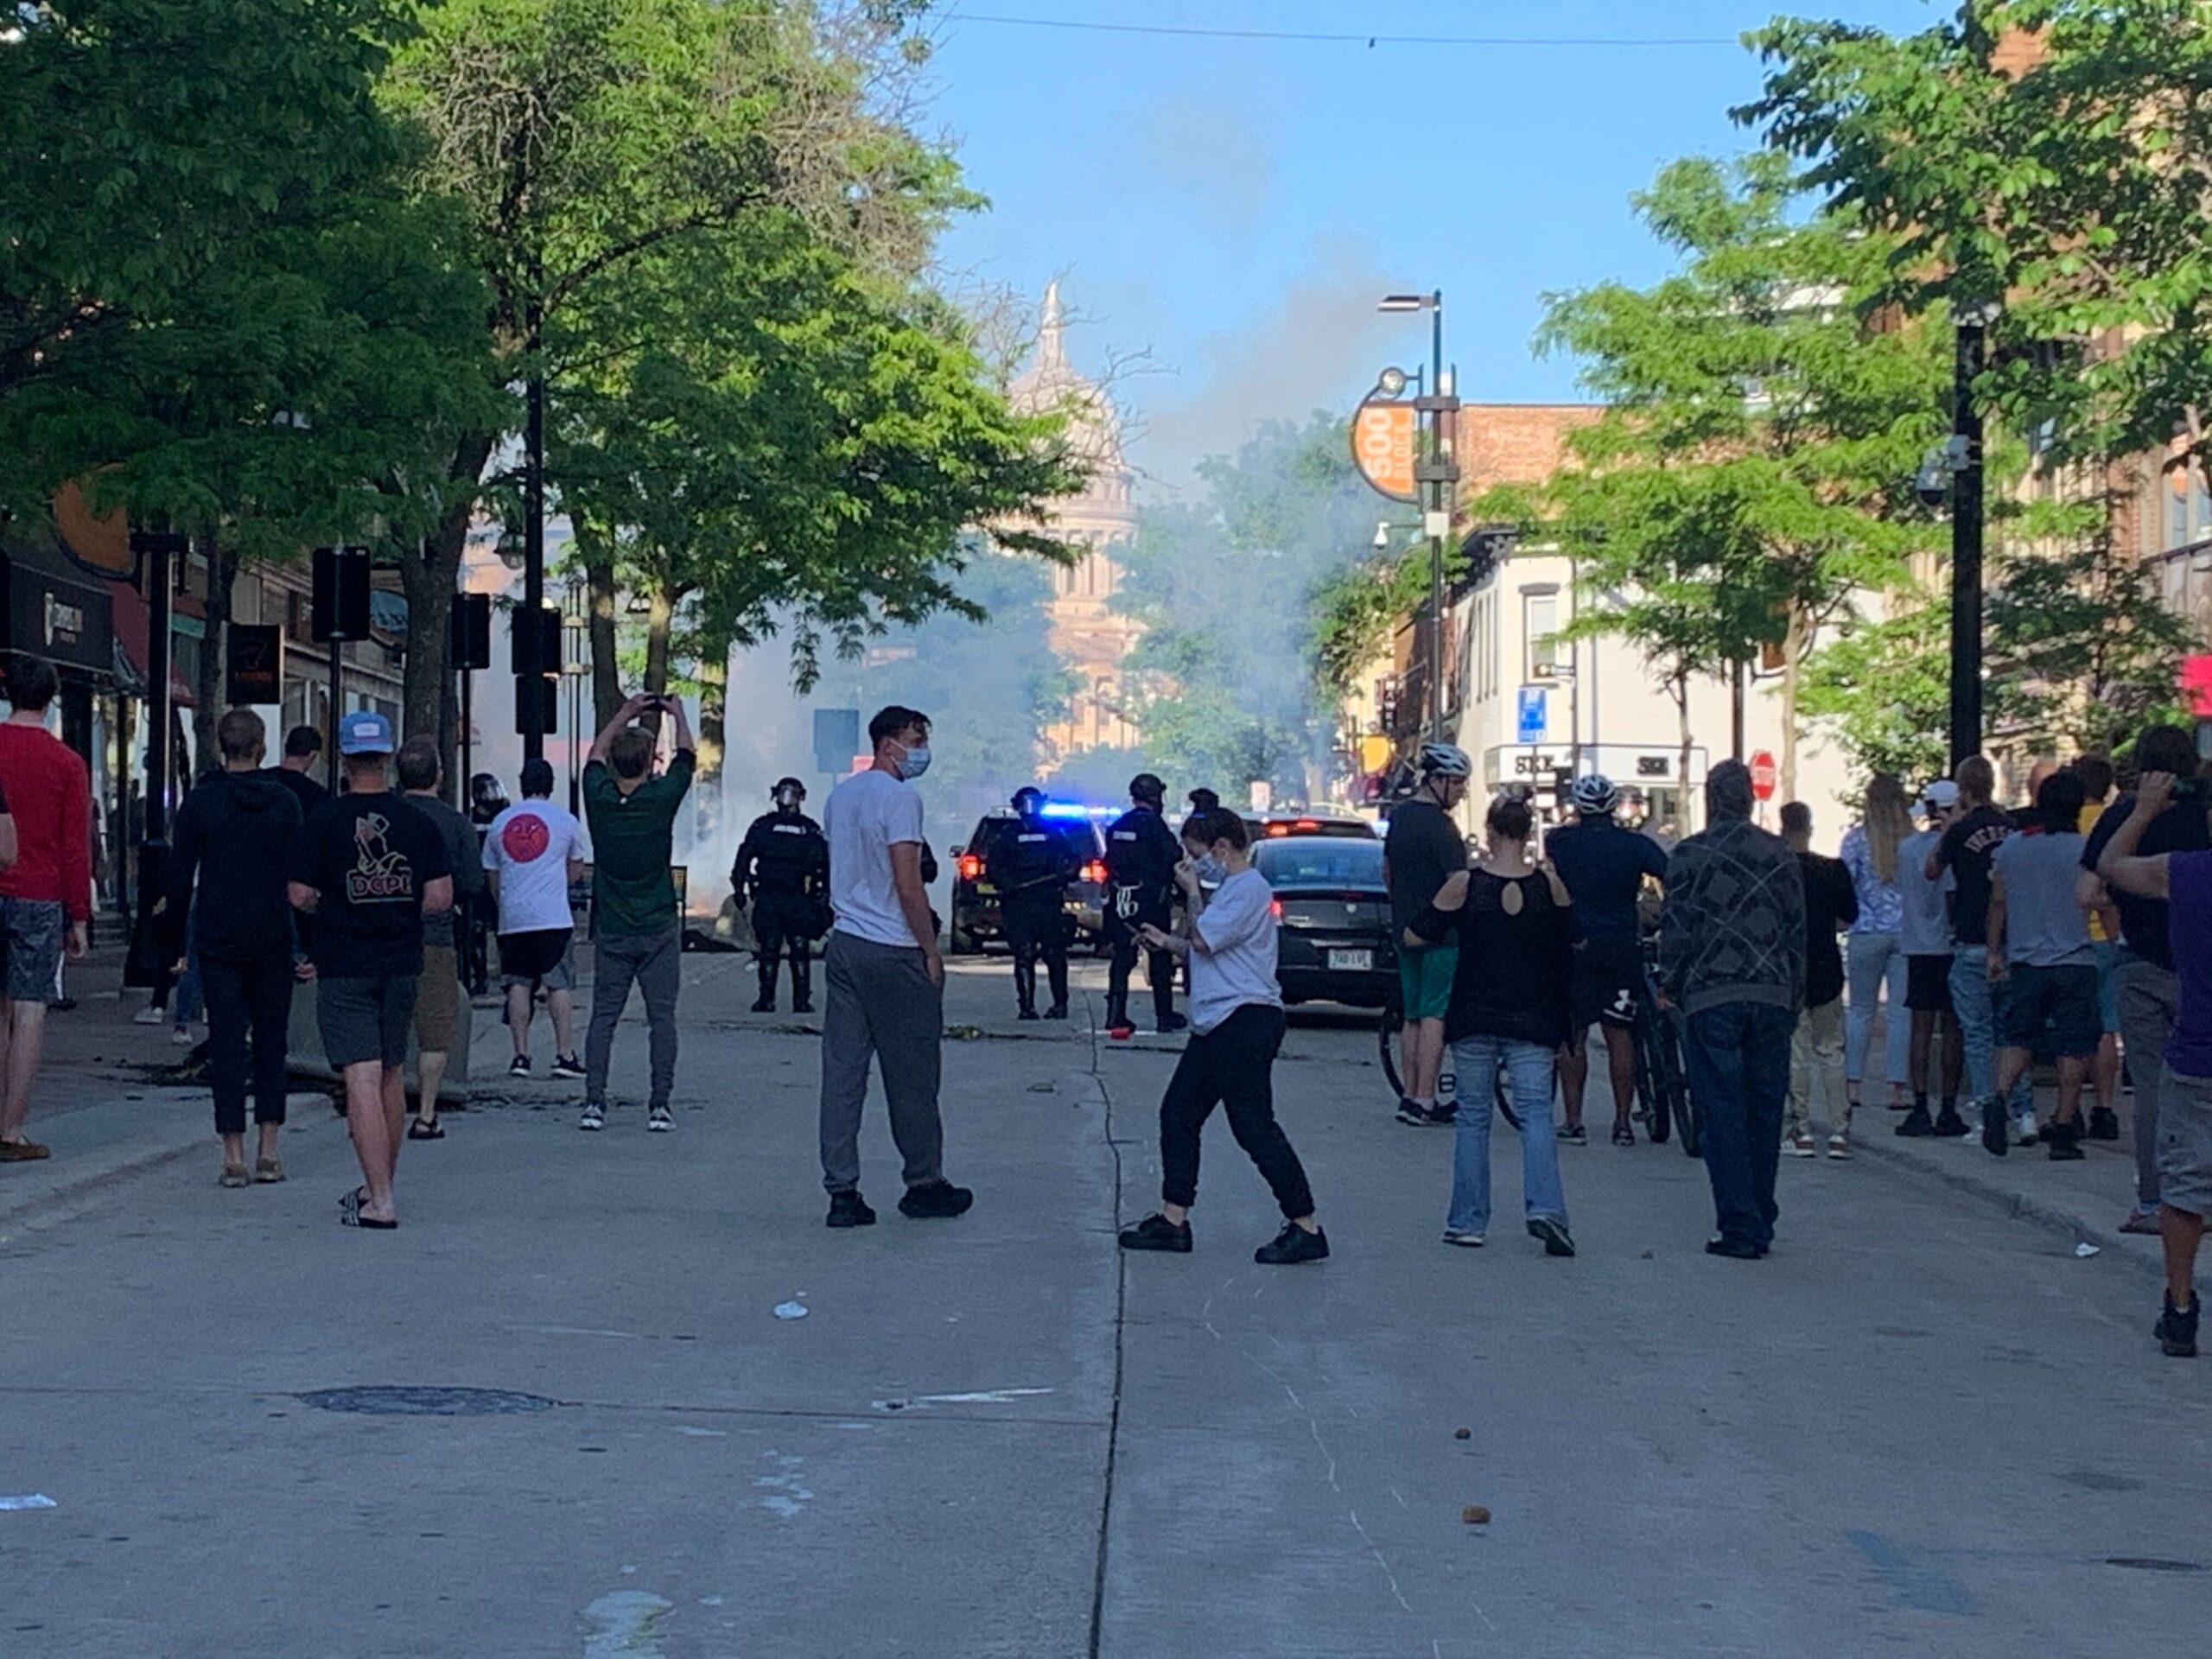 Madison will require reviews when police use tear gas to control crowds